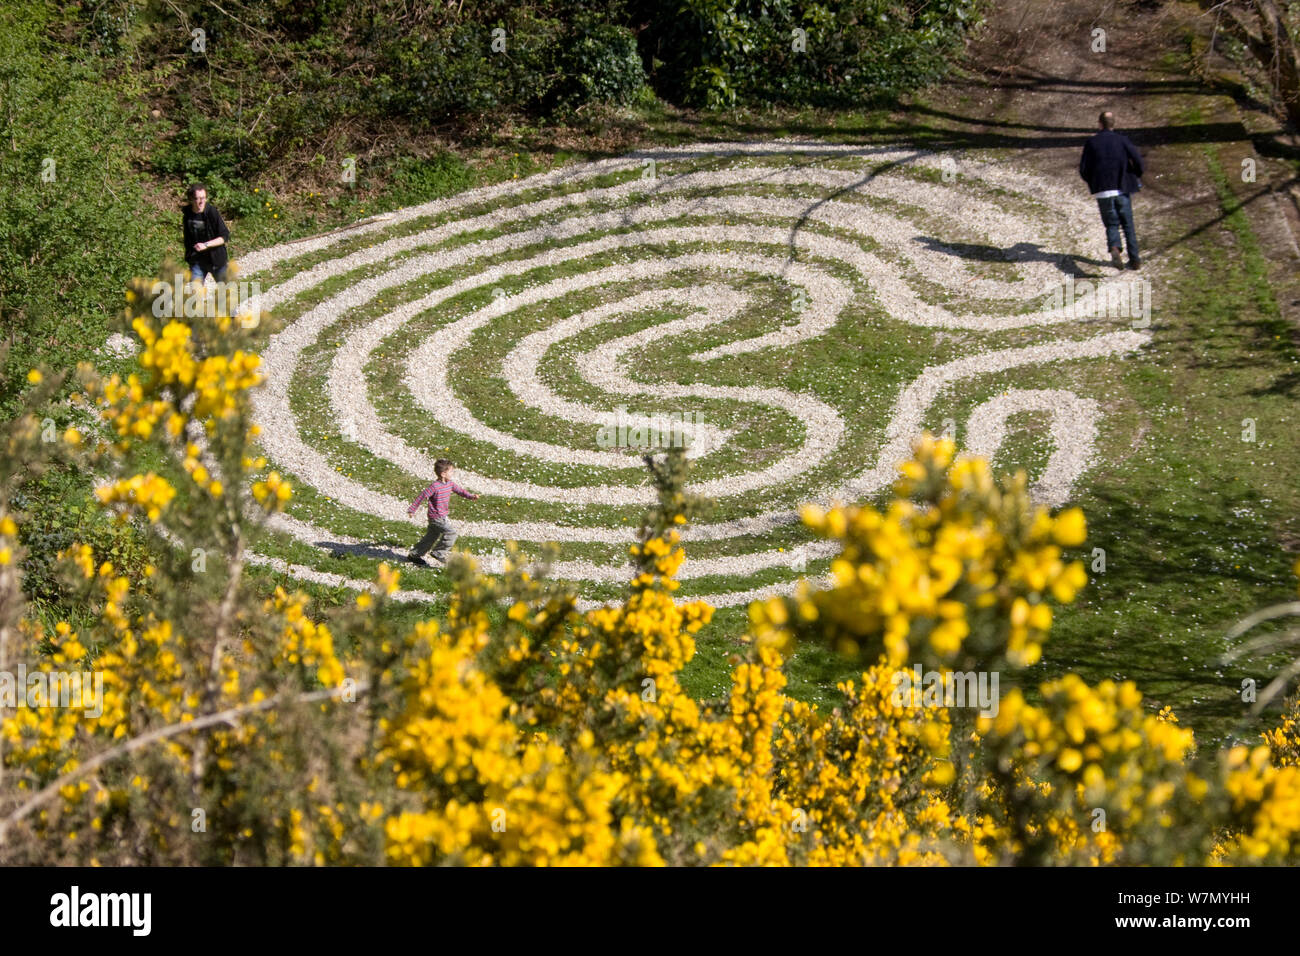 Maze, made out of cockle shells, in Rosehall Quarry Community Park, Swansea 2009 Stock Photo